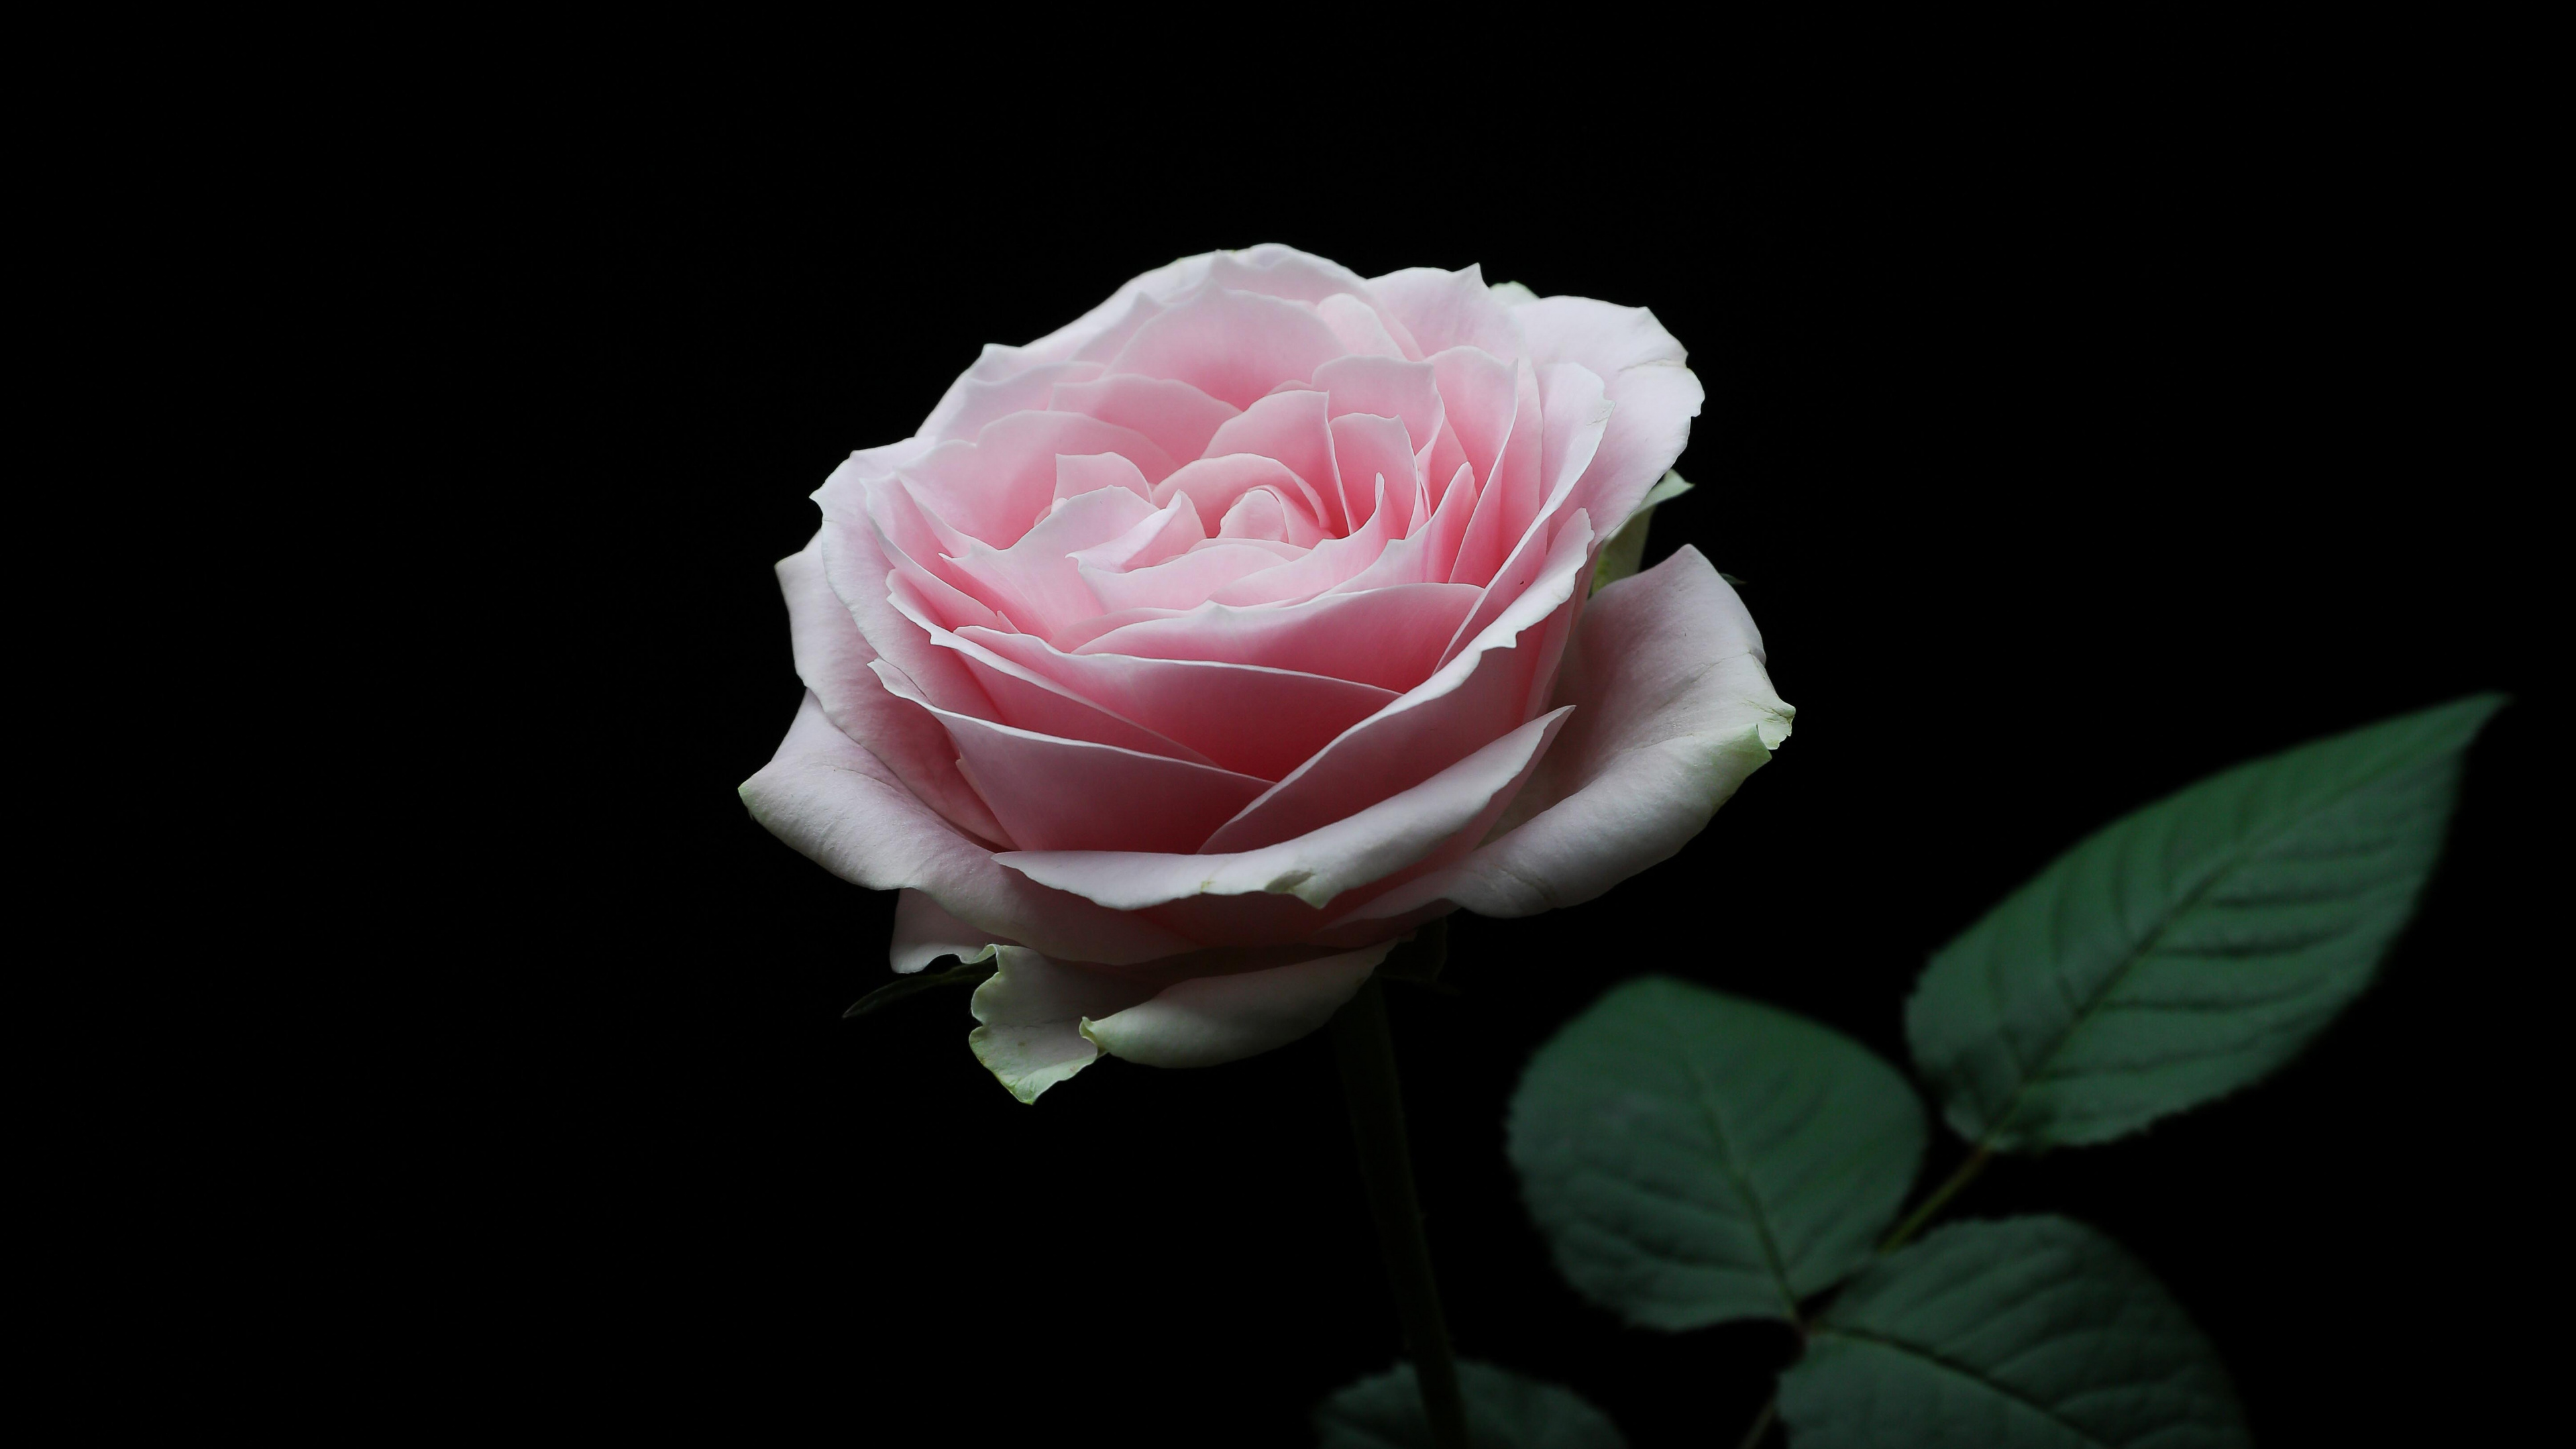 Pink Rose in Bloom With Black Background. Wallpaper in 3840x2160 Resolution